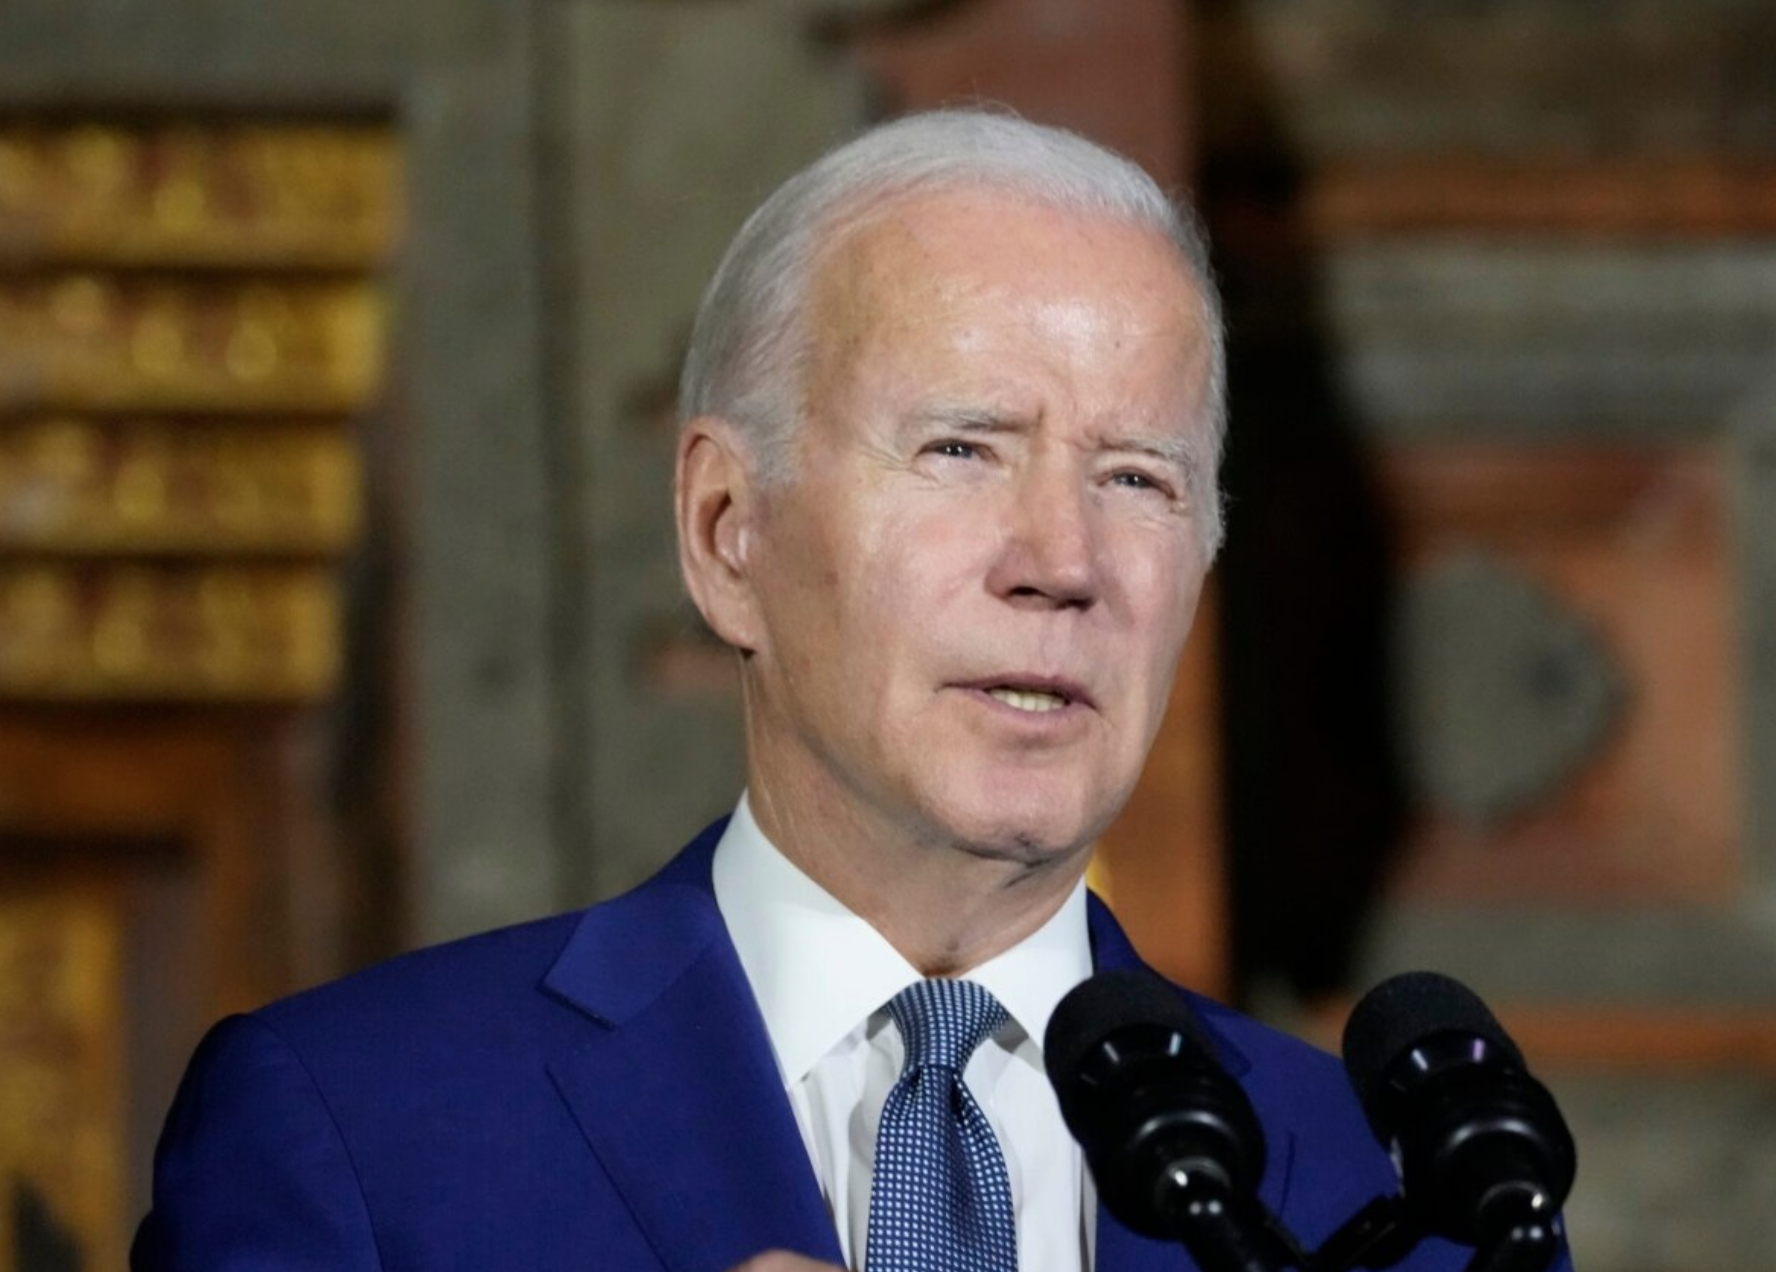 Biden to receive President Chaves of Costa Rica next week